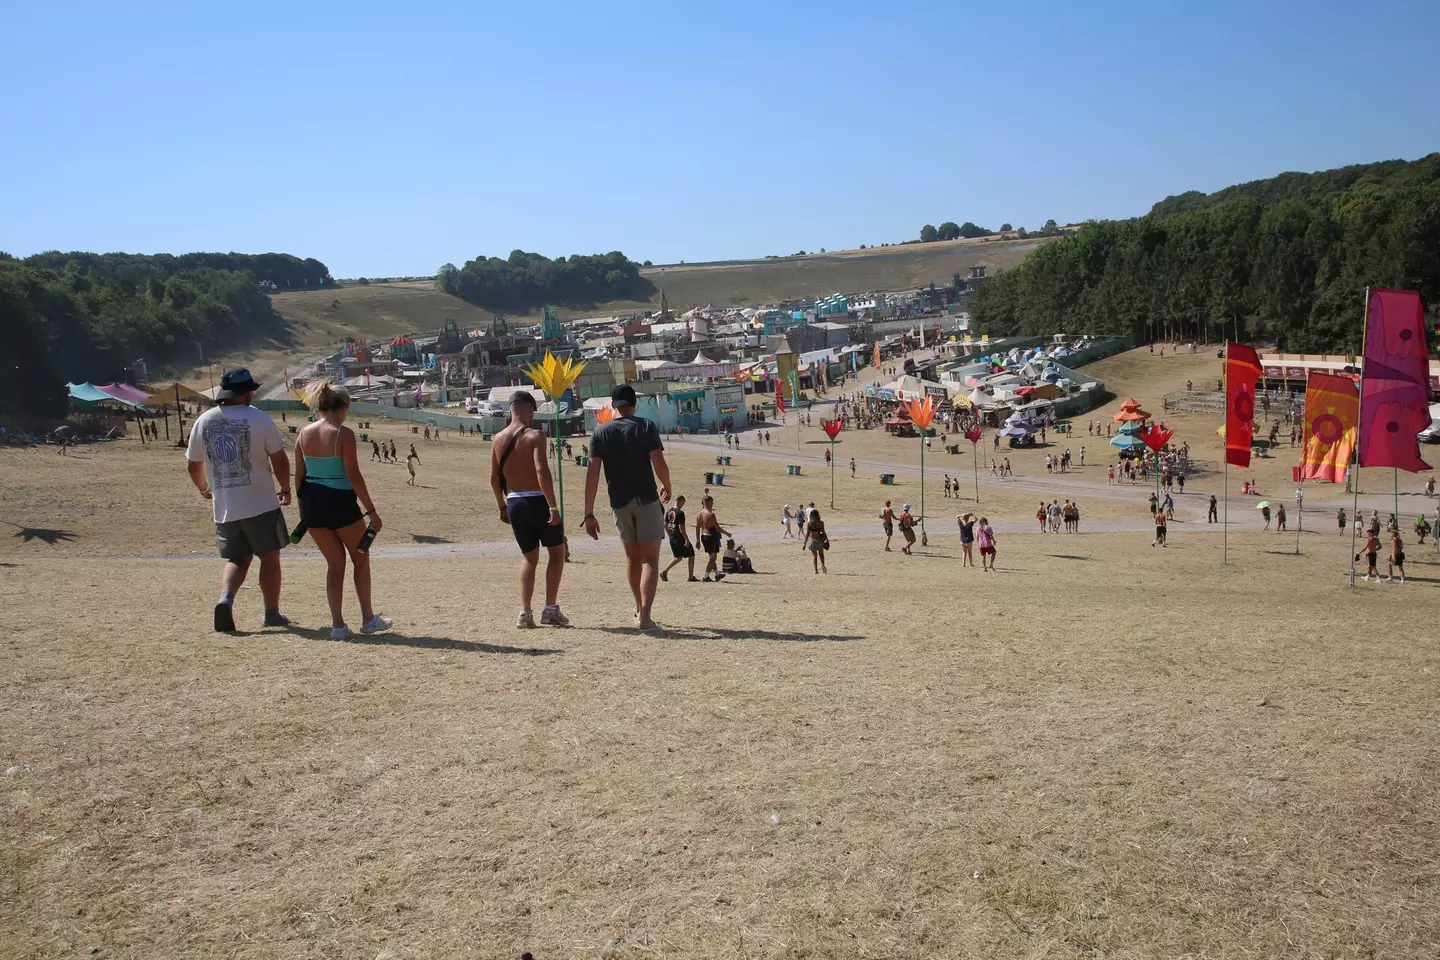 66,000 people attended Boomtown this year.